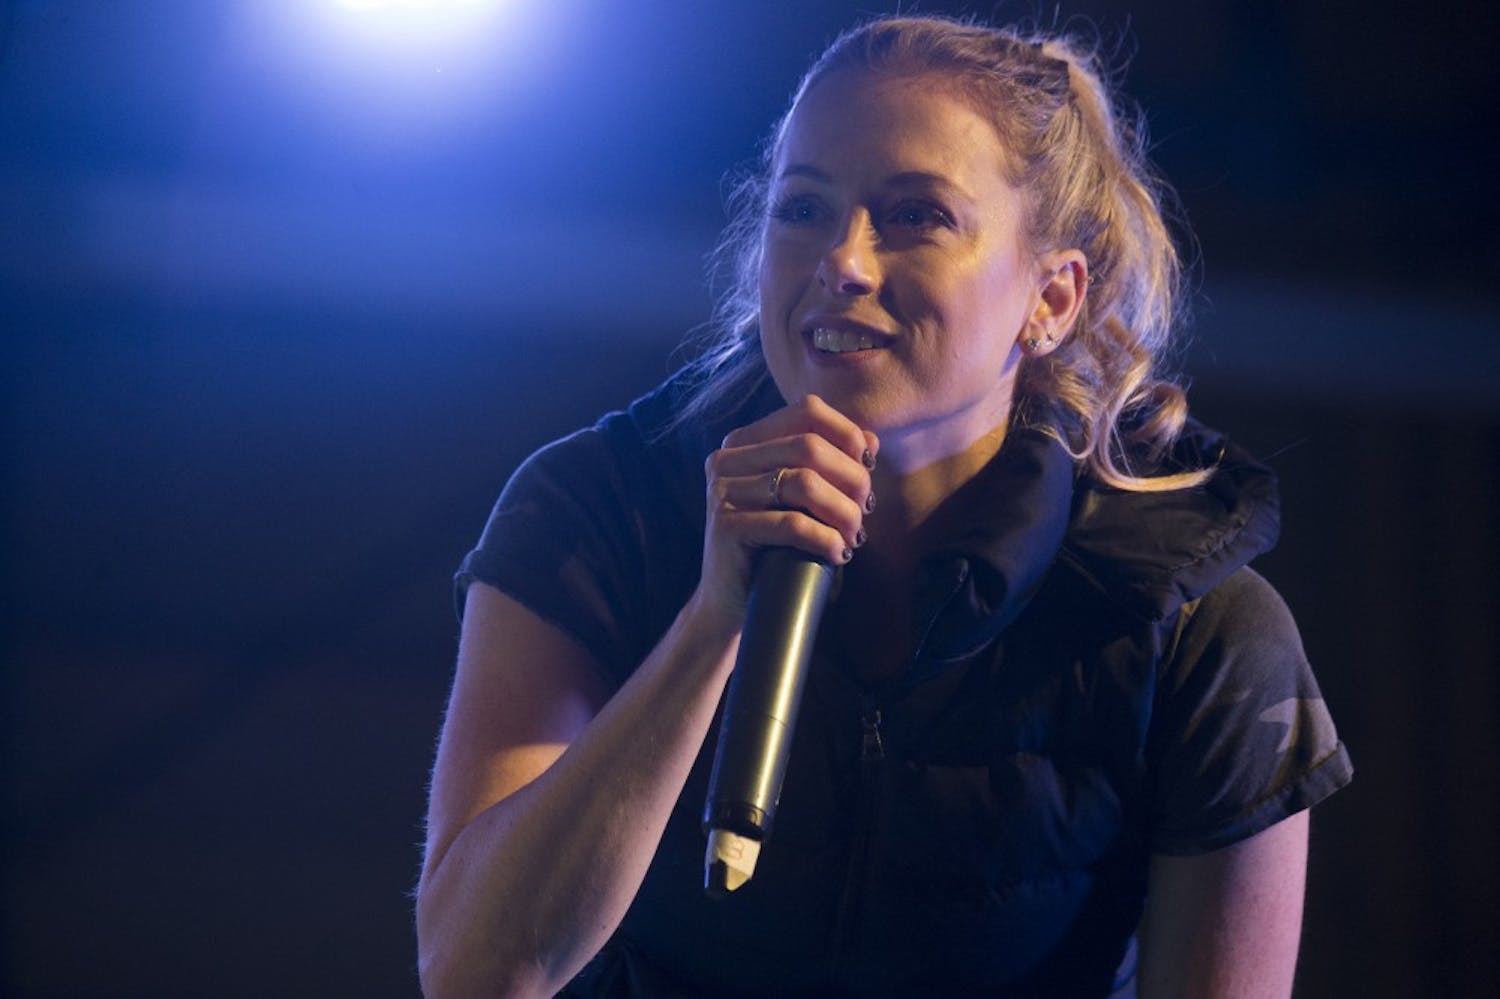 Comedian Iliza Shlesinger performs during Chairman’s USO Holiday Tour at Morón Air Base Dec. 21, 2017. Marine Corps Gen. Joe Dunford, chairman of the Joint Chiefs of Staff, and Army Command Sgt. Maj. John W. Troxell, senior enlisted advisor to the chairman, along with USO entertainers, visited service members who are deployed during the holidays at various locations across Europe and the Middle East. This year’s entertainers were Chef Robert Irvine, wrestler Gail Kim, comedian Iliza Shlesinger, actor Adam Devine, country musician Jerrod Niemann, and WWE Superstars “The Miz” and Alicia Fox. (DoD photo by Navy Petty Officer 1st Class Dominique A. Pineiro/Released)